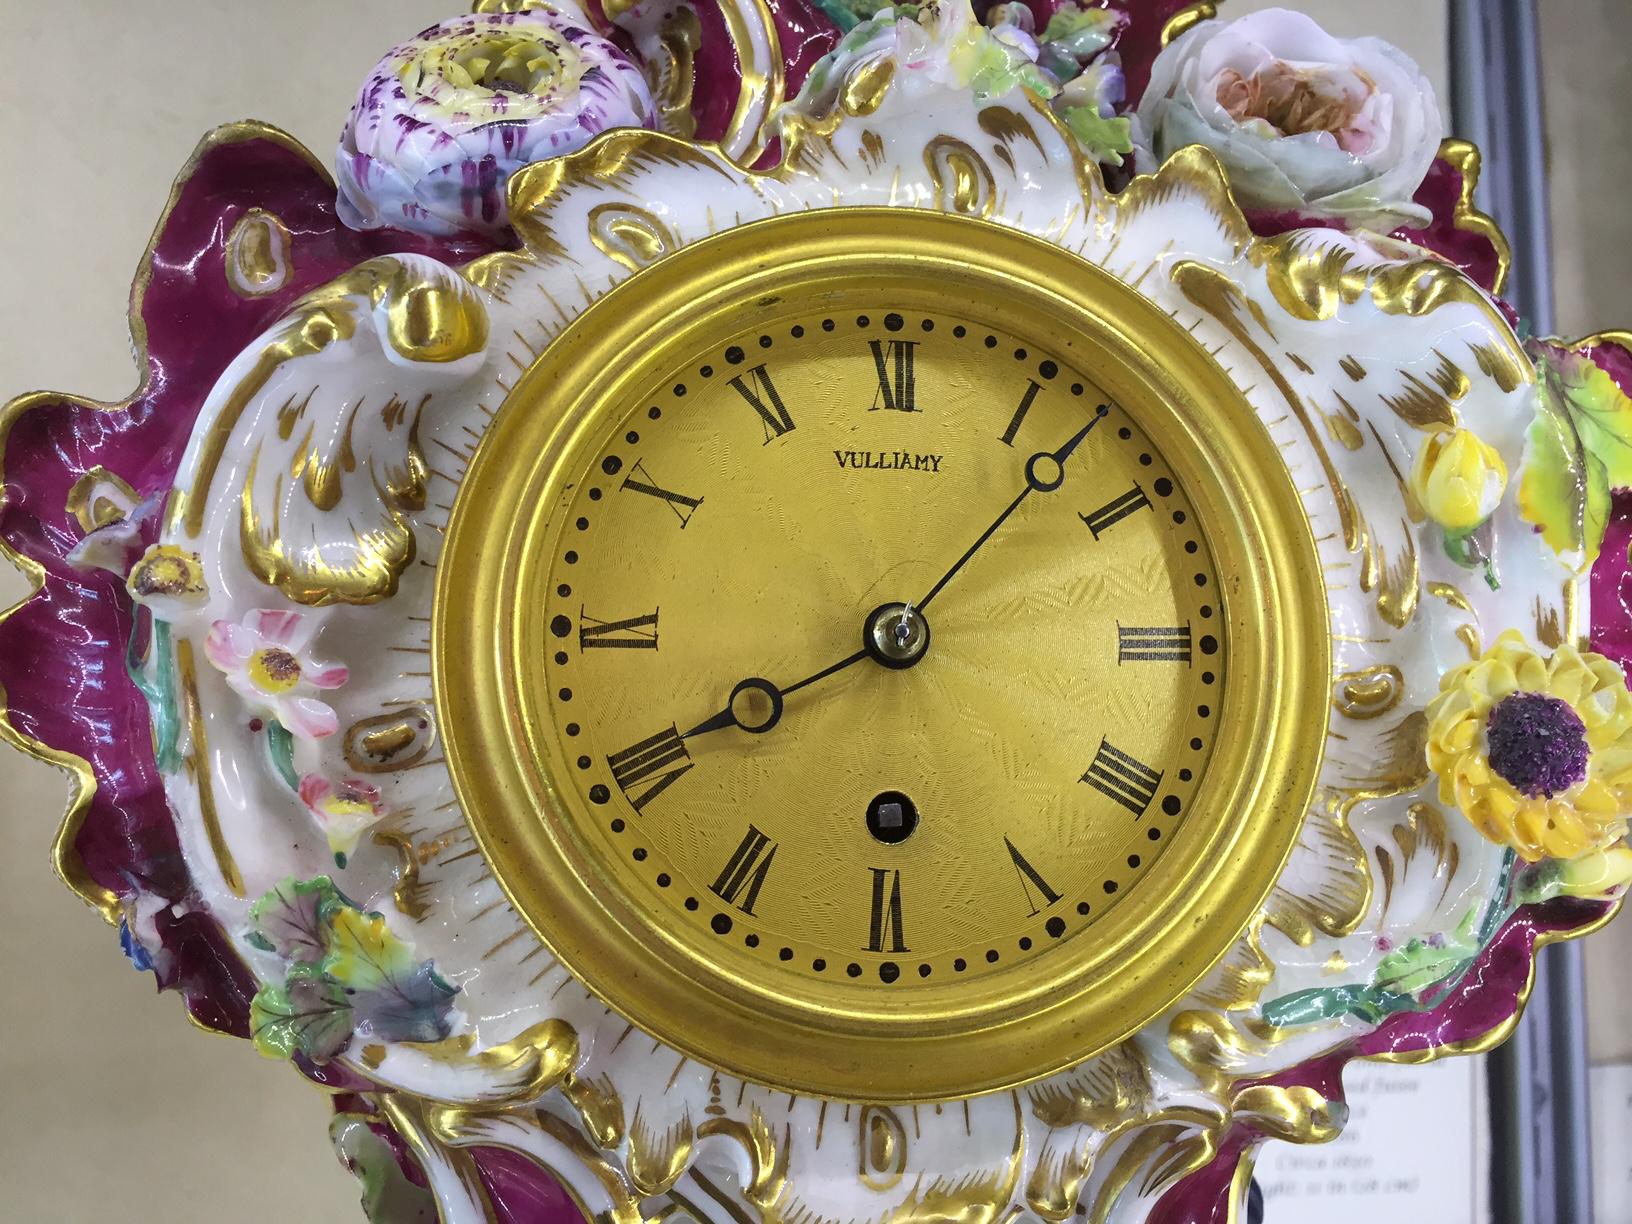 A fine early 19th century Coalport Porcelain cased timepiece by this famous maker.

The elaborate pink ground porcelain case is set with exotic birds and flowers on scroll feet, with gilded scrollwork and latticework. The 2.75 inch gilt dial with